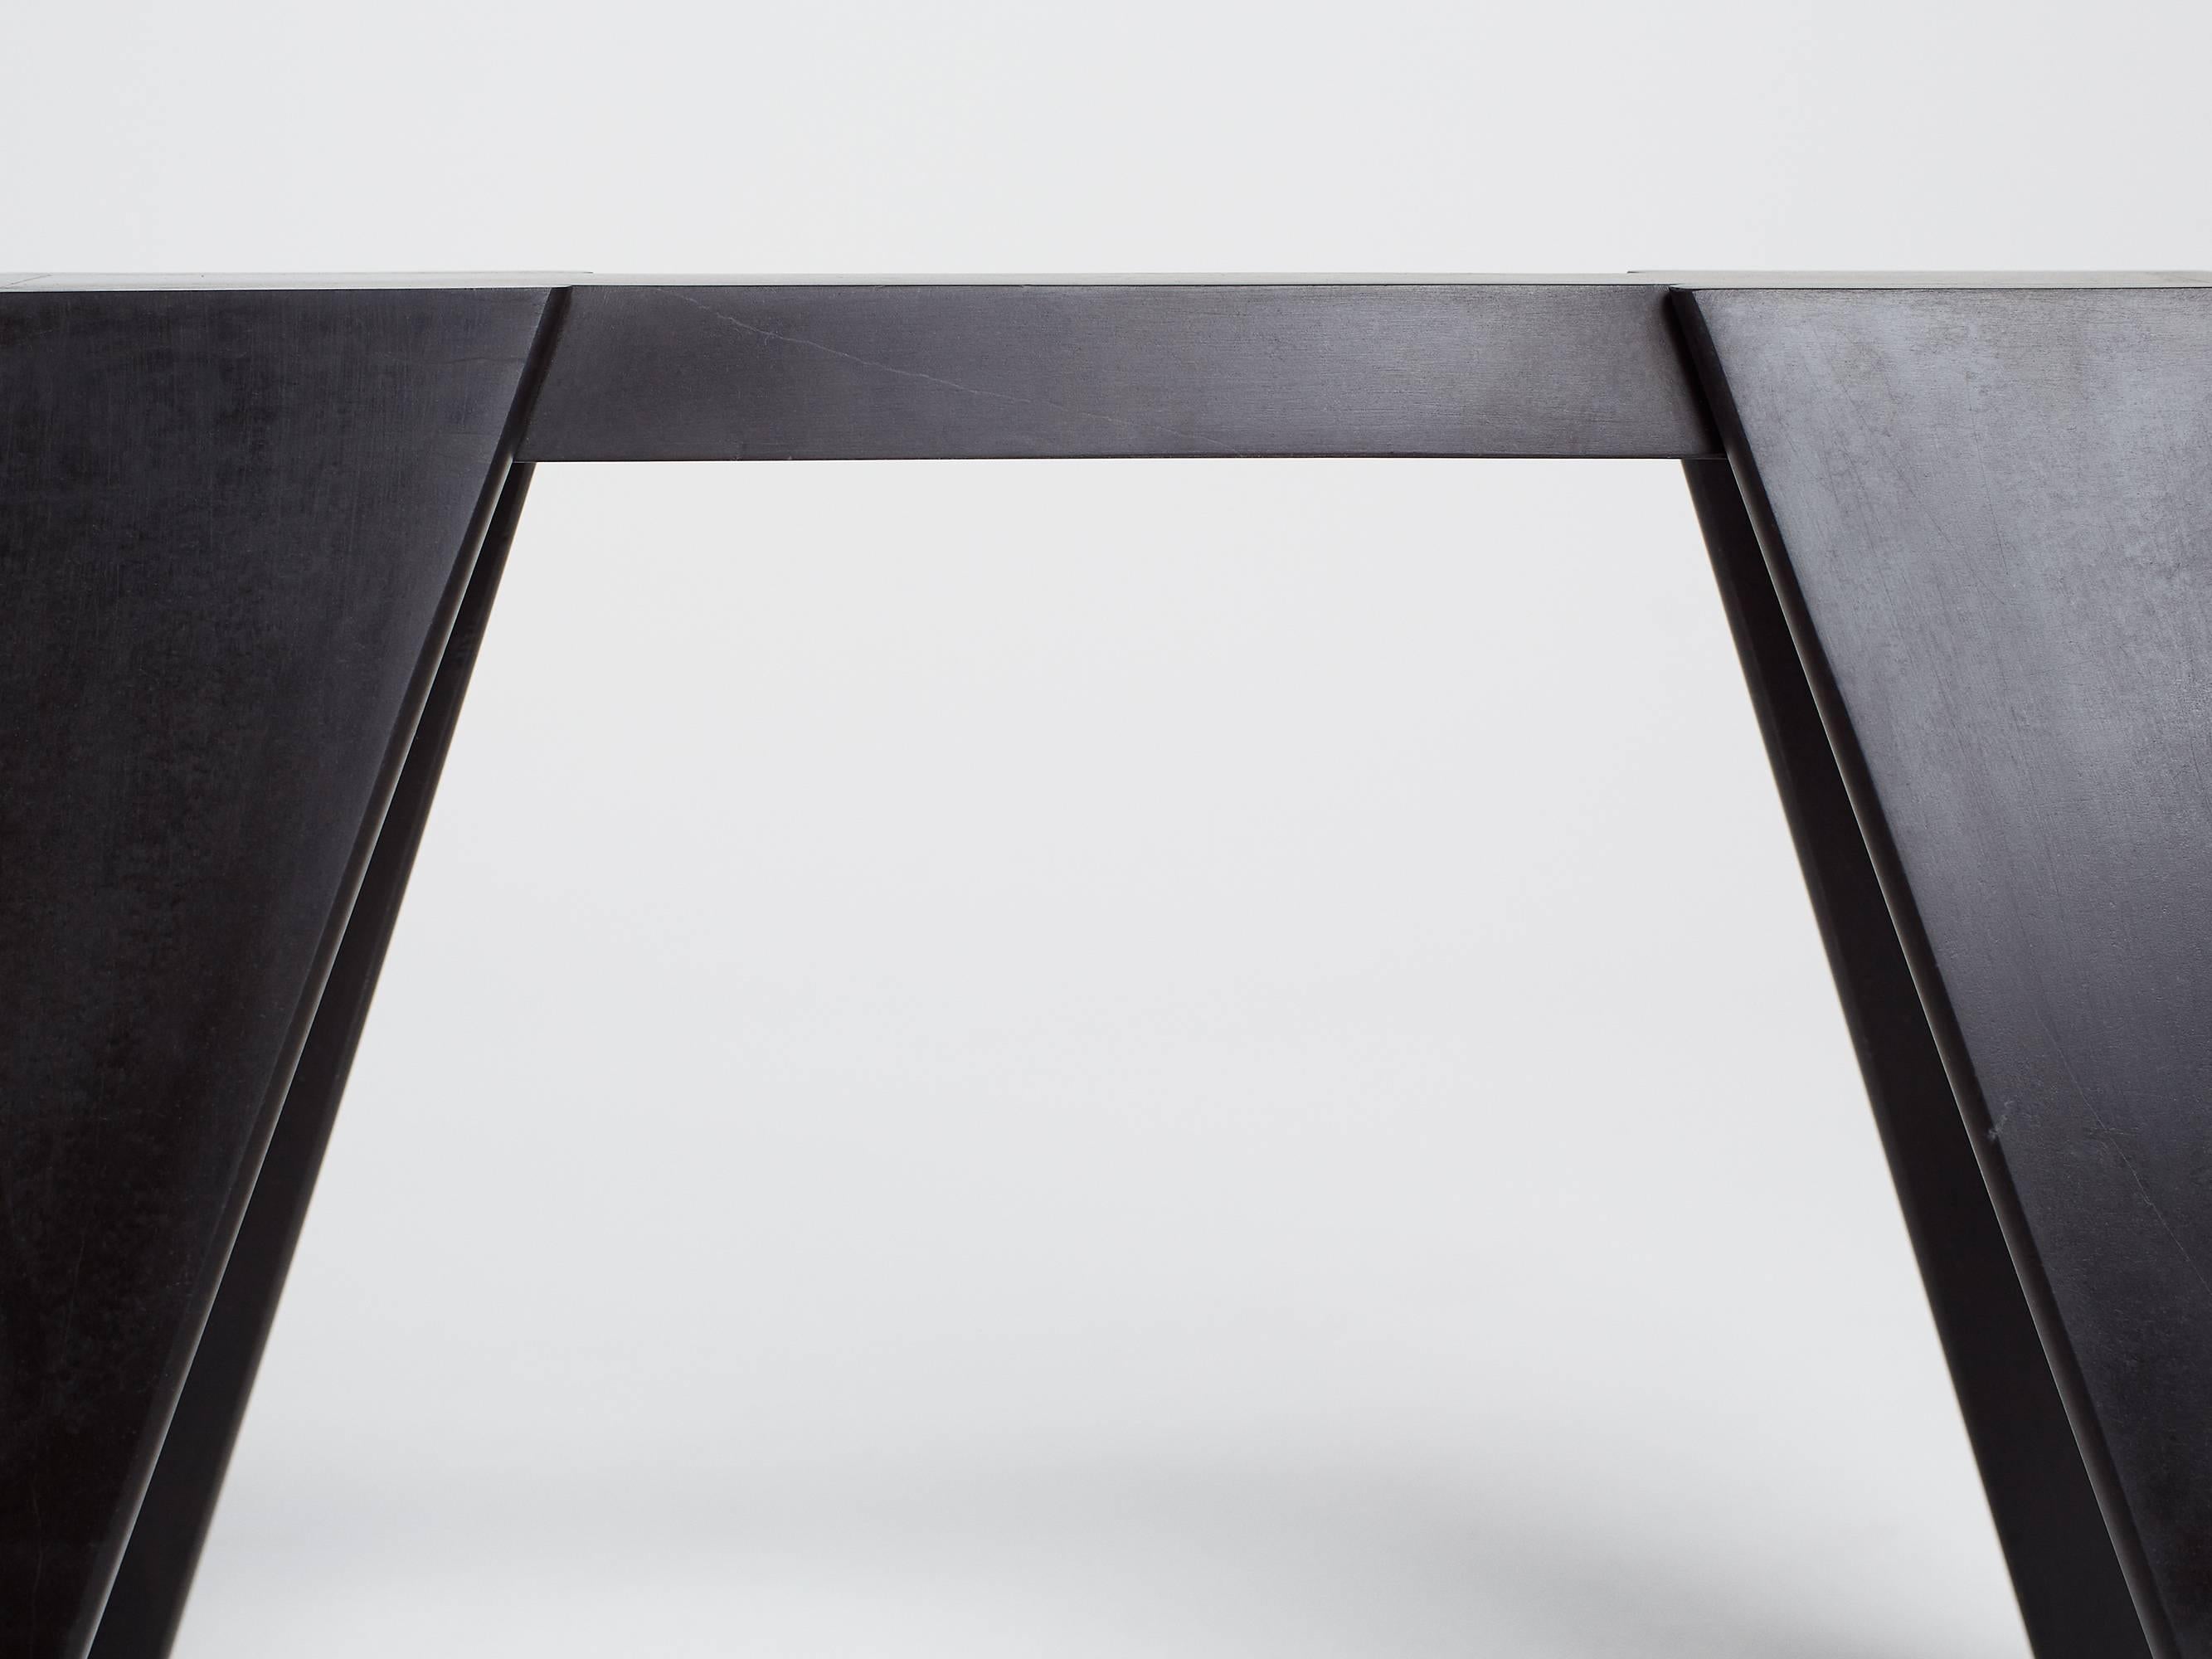 Hand sculpted by Los-Angeles based master stone carver, Nathan Hunt, the workhorse console table is made entirely from Nero Marquina marble and is a contemporary take on the classic sawhorse or workhorse table.

Perfect as a console table the